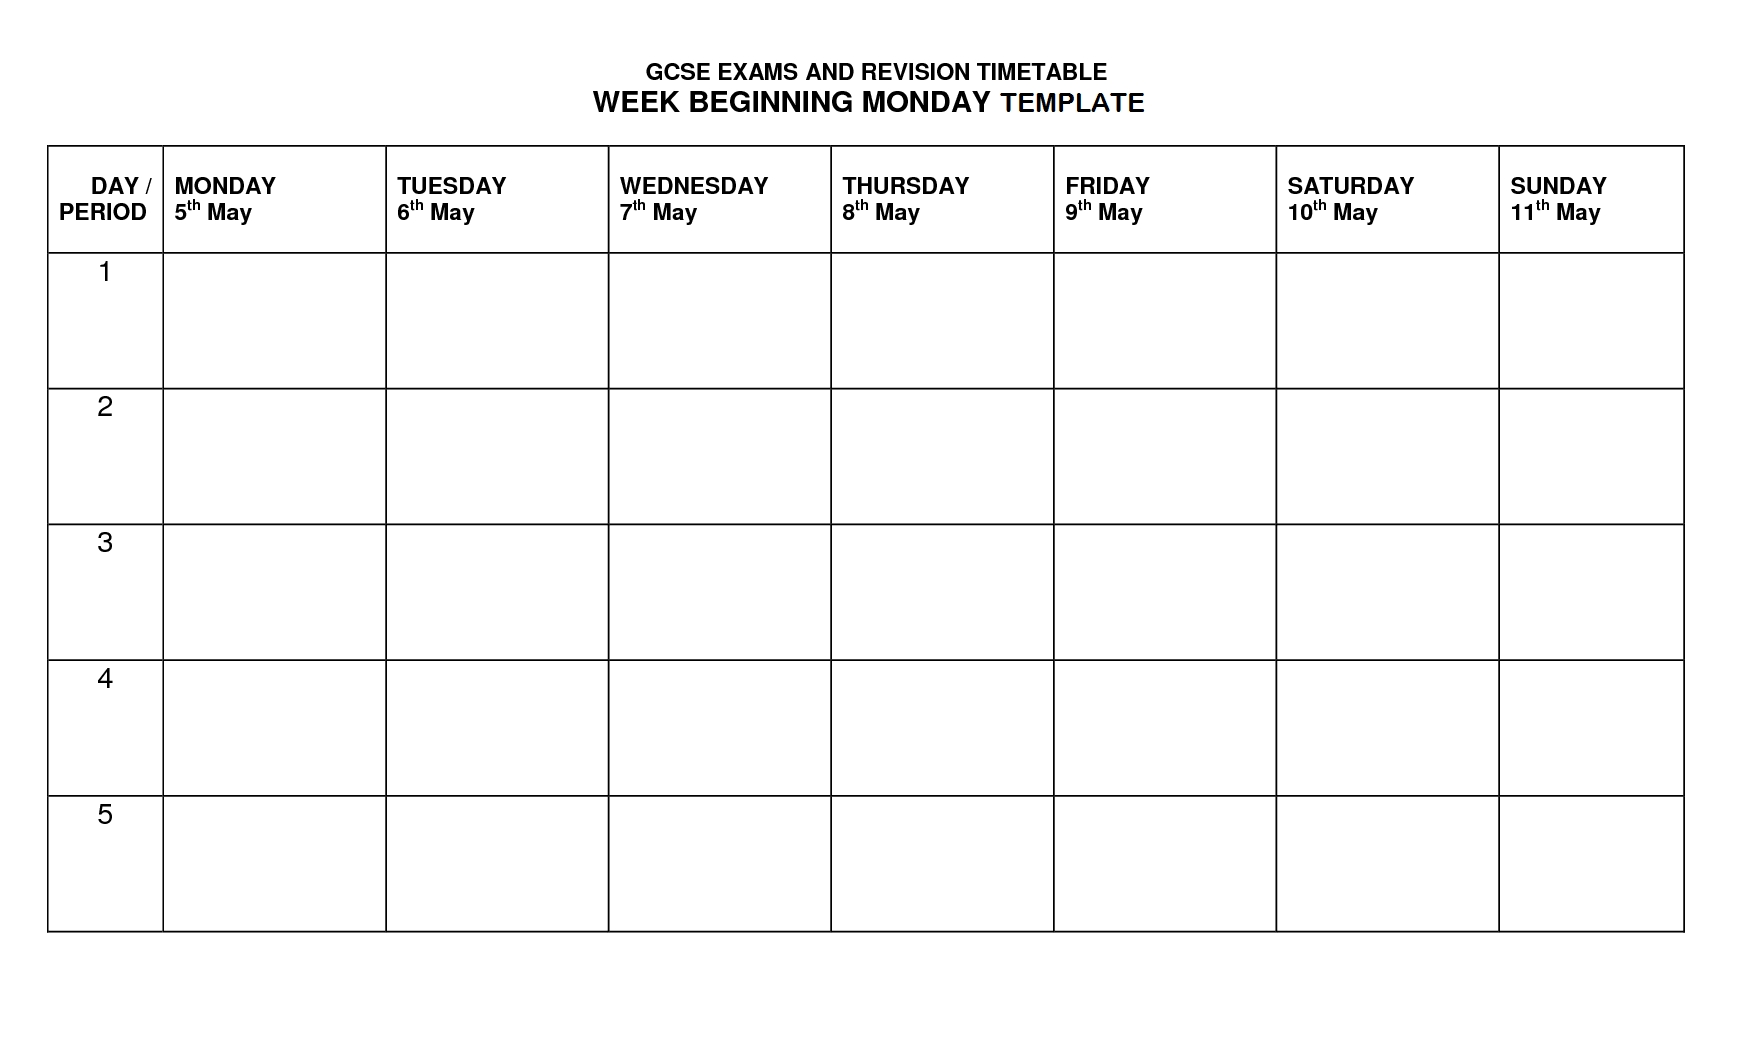 Timetable Template | Timetable Template, Revision Timetable